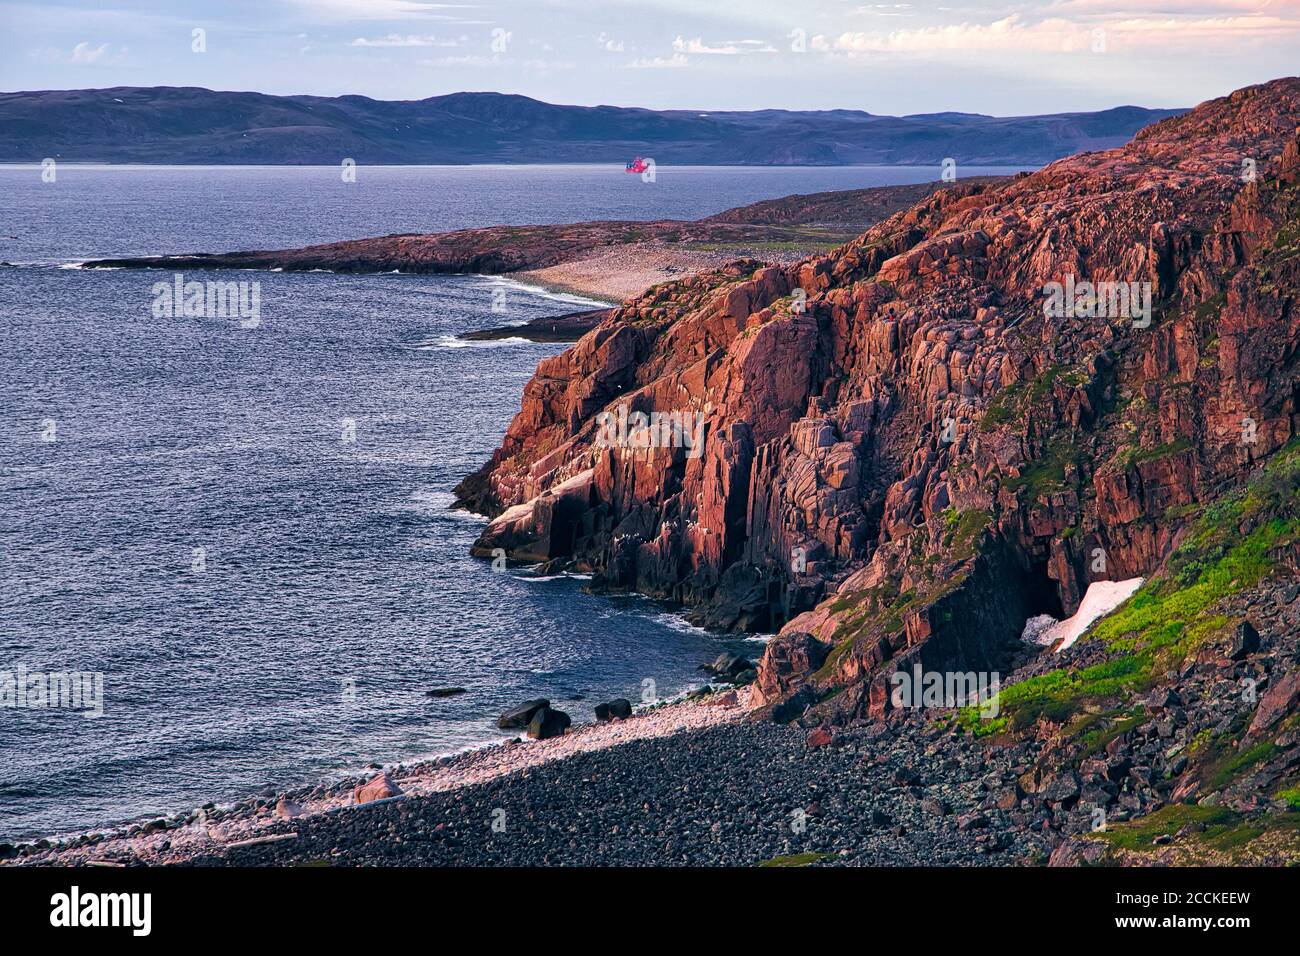 Cliffs and rocky beach of Barents Sea Stock Photo